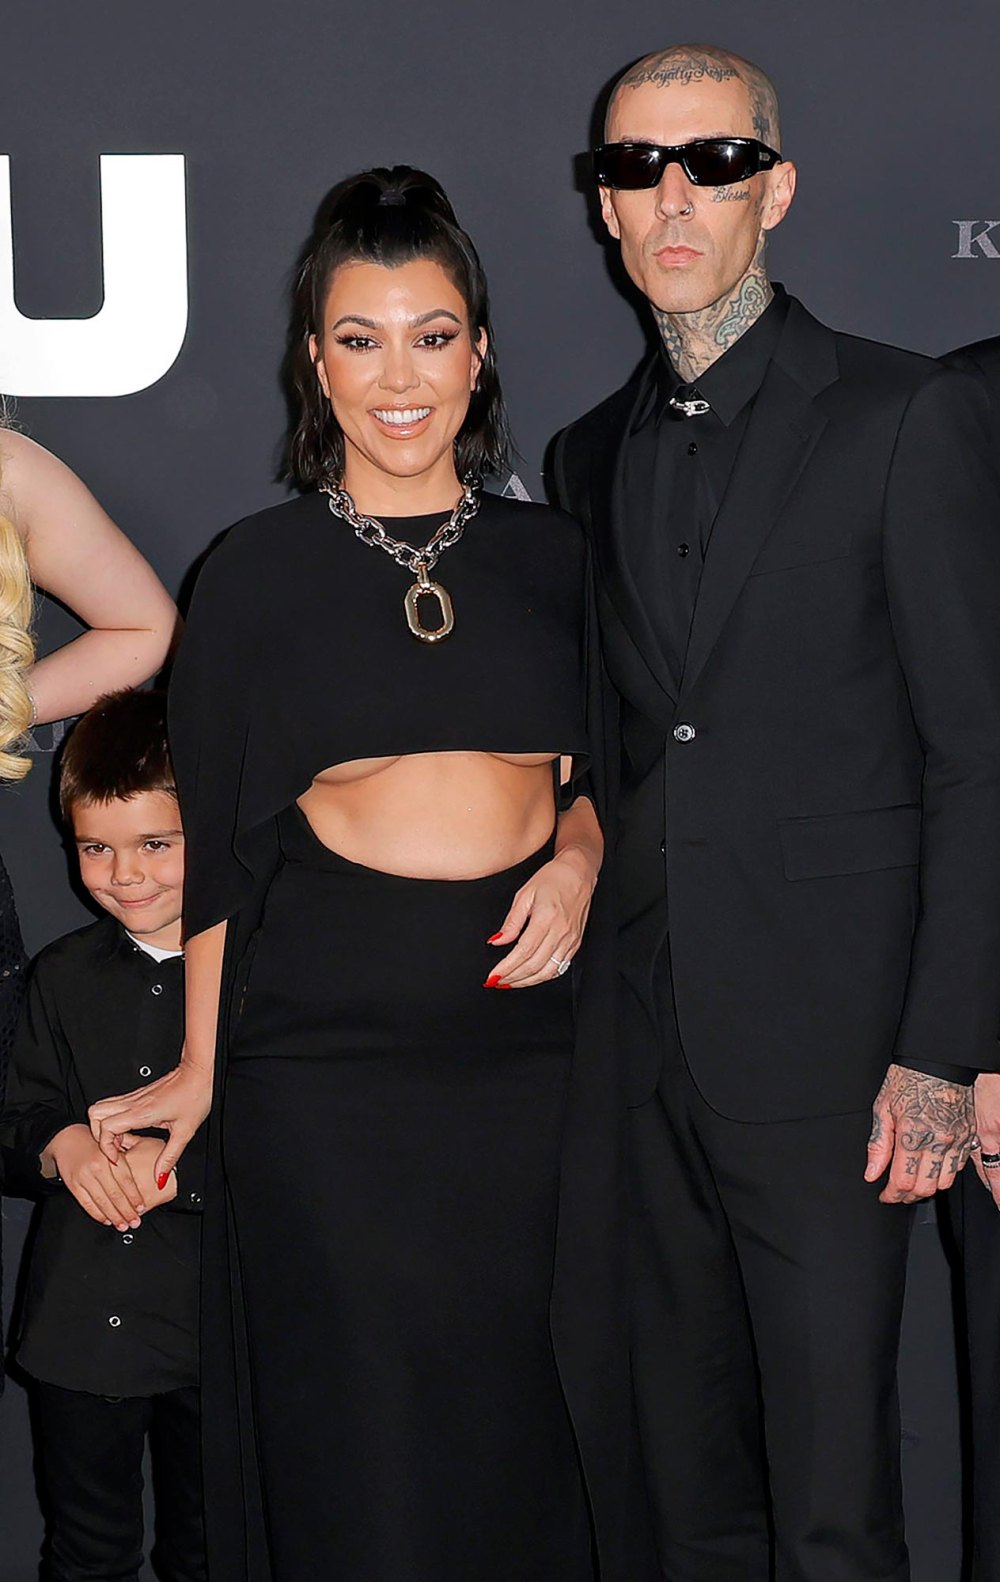 What Name Did Reign Disick Suggest for Kourtney Kardashian and Travis Barker s Baby Boy? 440